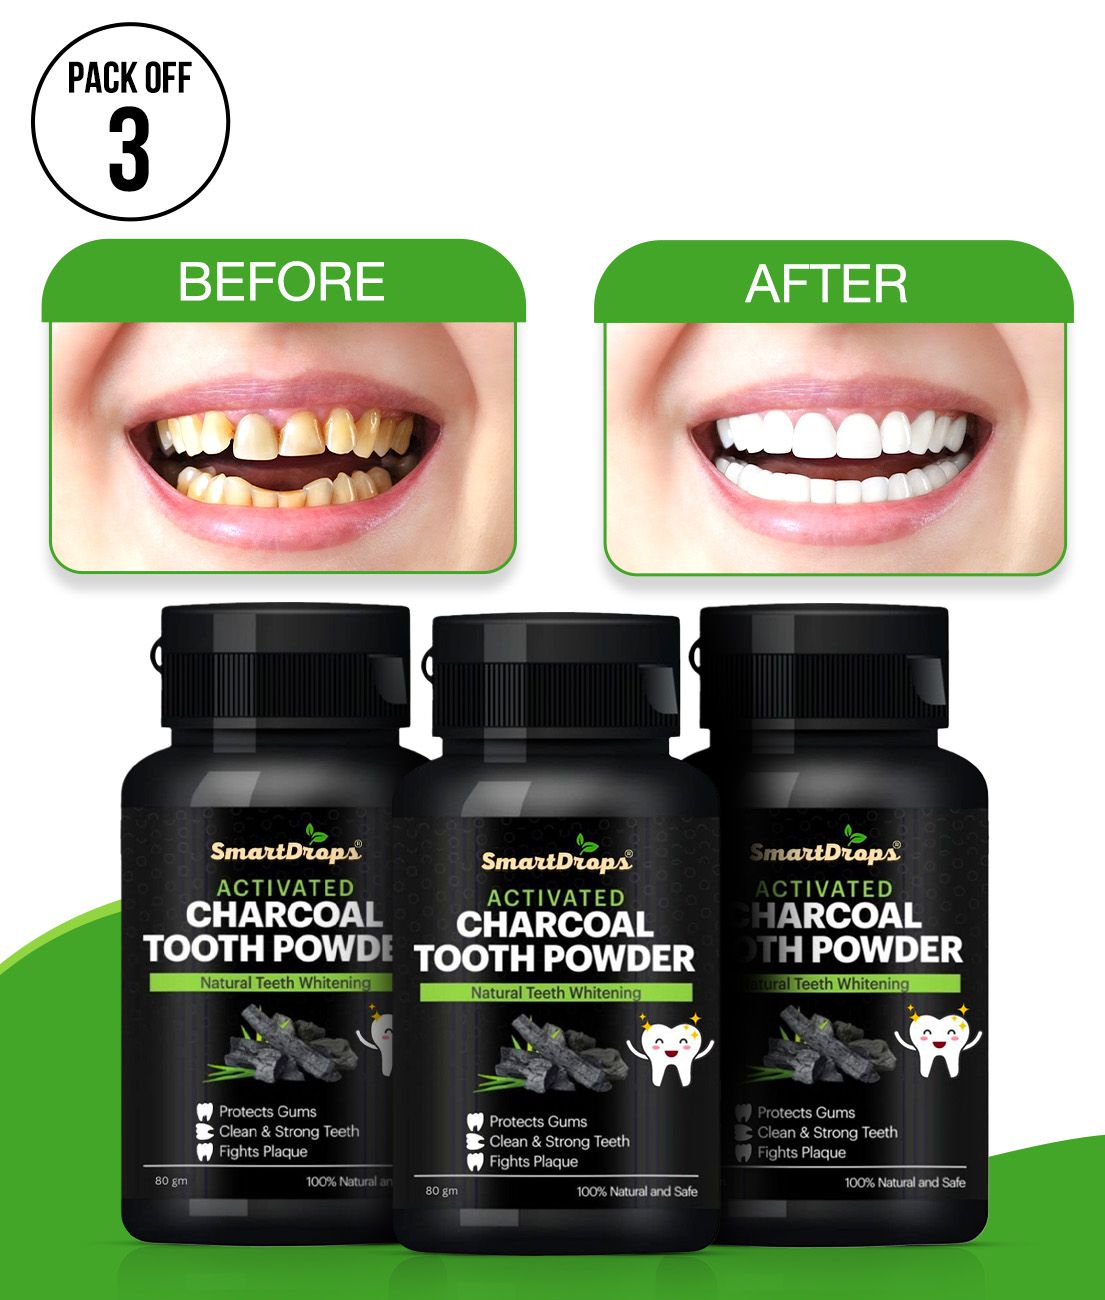     			Smartdrops Activated Charcoal Teeth Powder For Teeth Whitening Powder 80gm Pack of 3